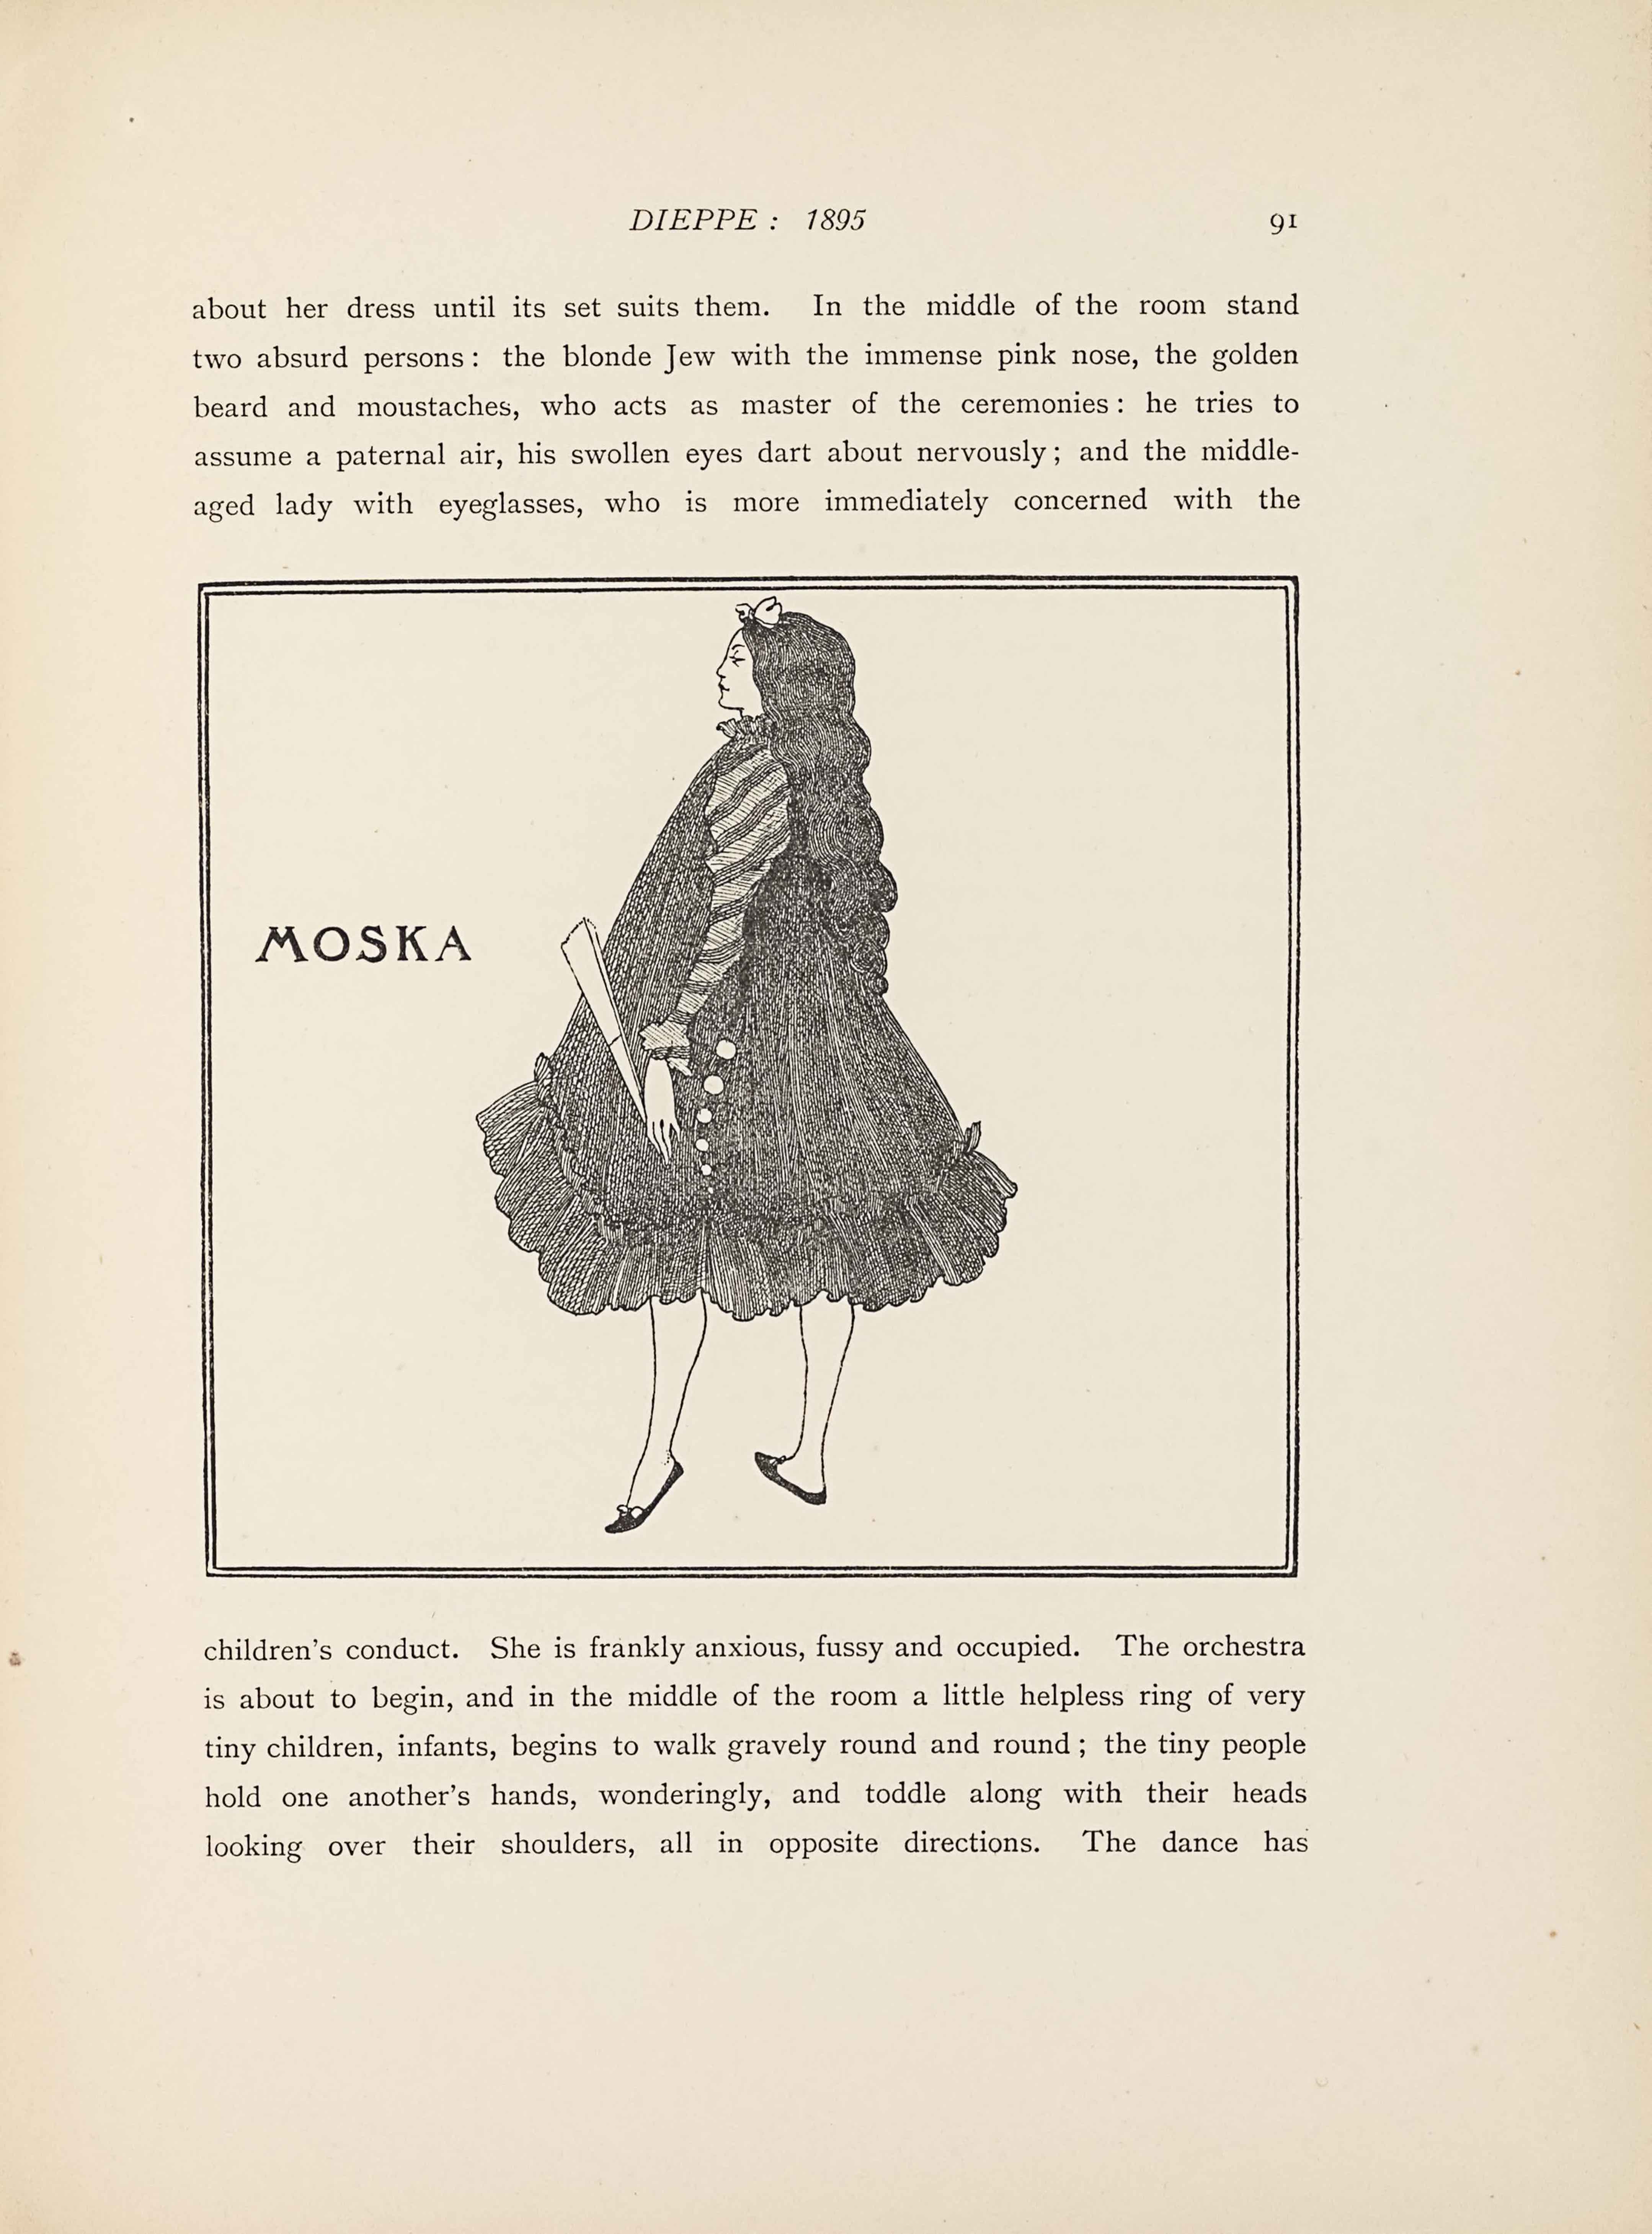 This line block reproduction of a pen-and-ink drawing is in a square box,                           bordered by a double-lined frame. The image shows the full-length figure of a                           woman in profile and the word “MOSKA” [caps] appears to the left about                           one-third down the page. The woman is turned to the left side of the page,                           facing the text “MOSKA” [caps]. She takes up the entire height of the image and                           is centered, taking up about half the width. She is wearing dark slippers with                           a small bow at the toe of each. Her legs are bare underneath a knee-length                           dress. The dress is very puffy, with no visible waistline, and an A-line                           silhouette. The bottom edge at the knee is made of chiffon ruffles. The side to                           the right of the page has six white buttons that start at her midline and go                           straight down getting smaller towards the bottom of the dress. The sleeve is                           long and diagonally striped. In the hand visible to the viewer from her left                           side she holds a closed fan. The neck of her dress has slight ruffling and her                           long curly hair cascades down to below her midline. A bow sits on top of her                           forehead.